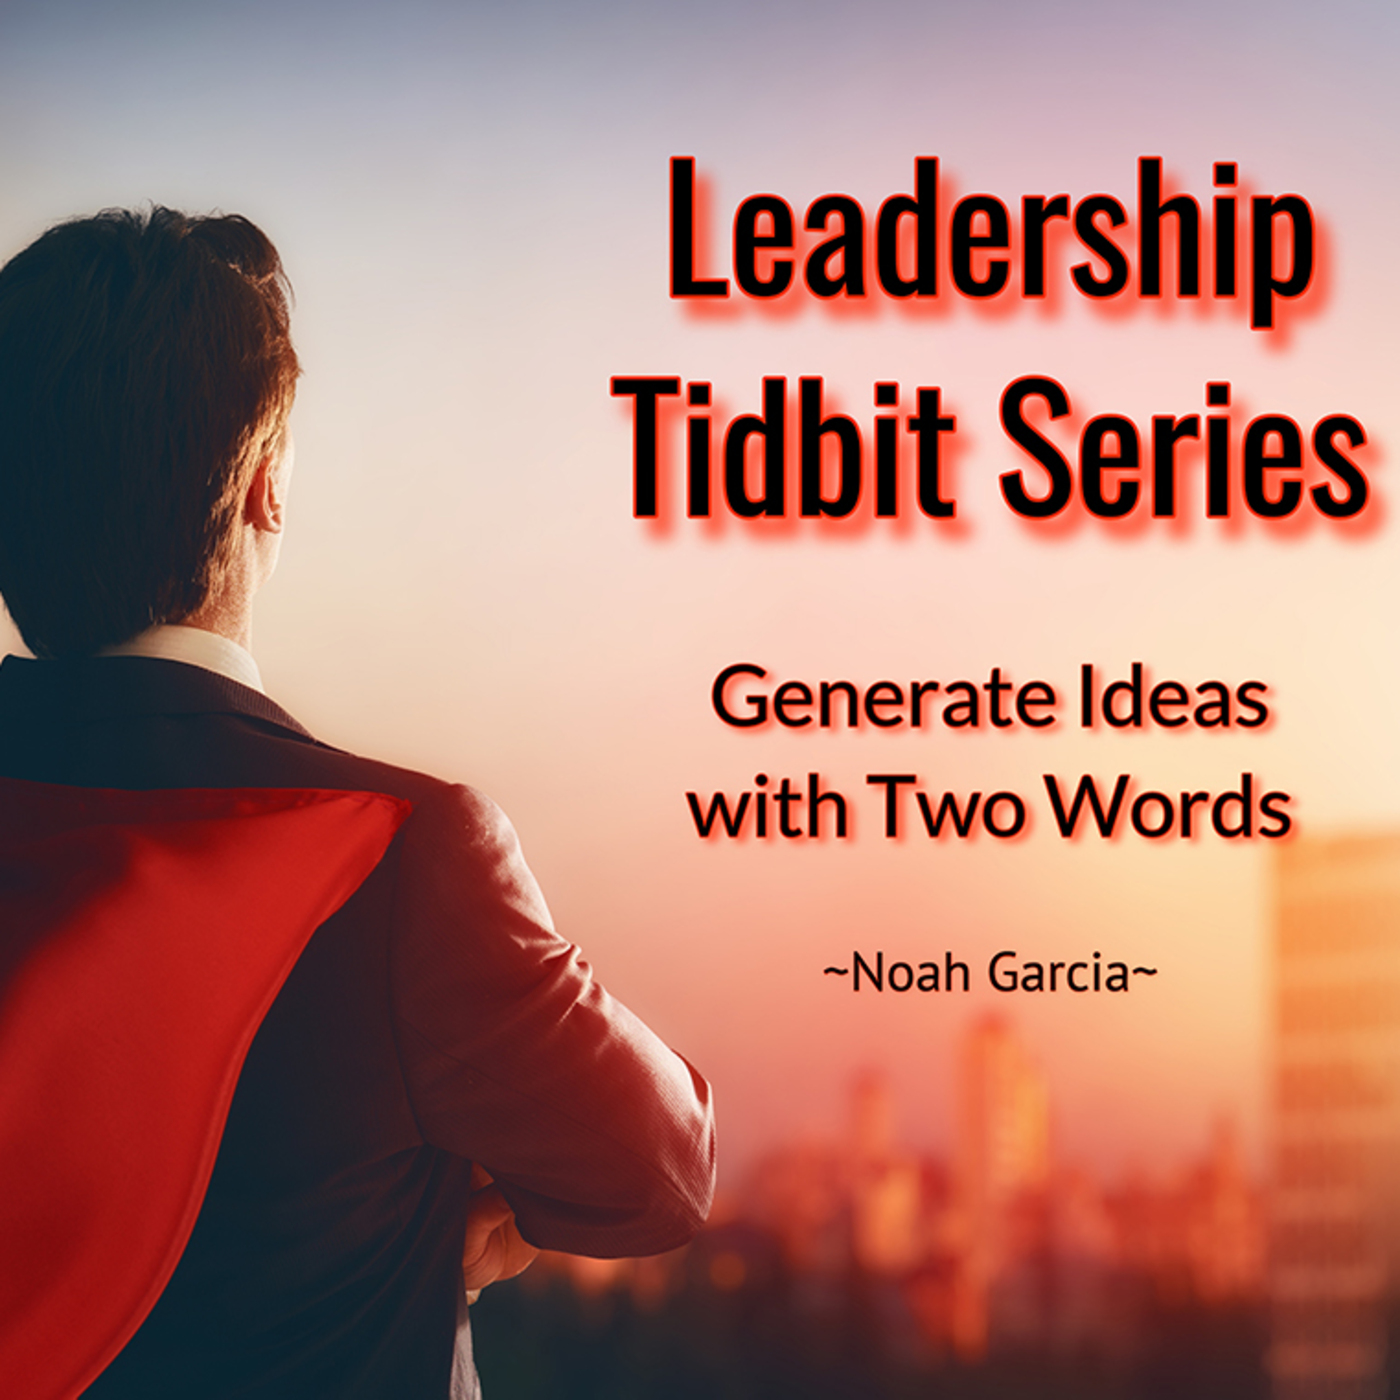 Leadership Tidbit Series: Generate Ideas with Two Words